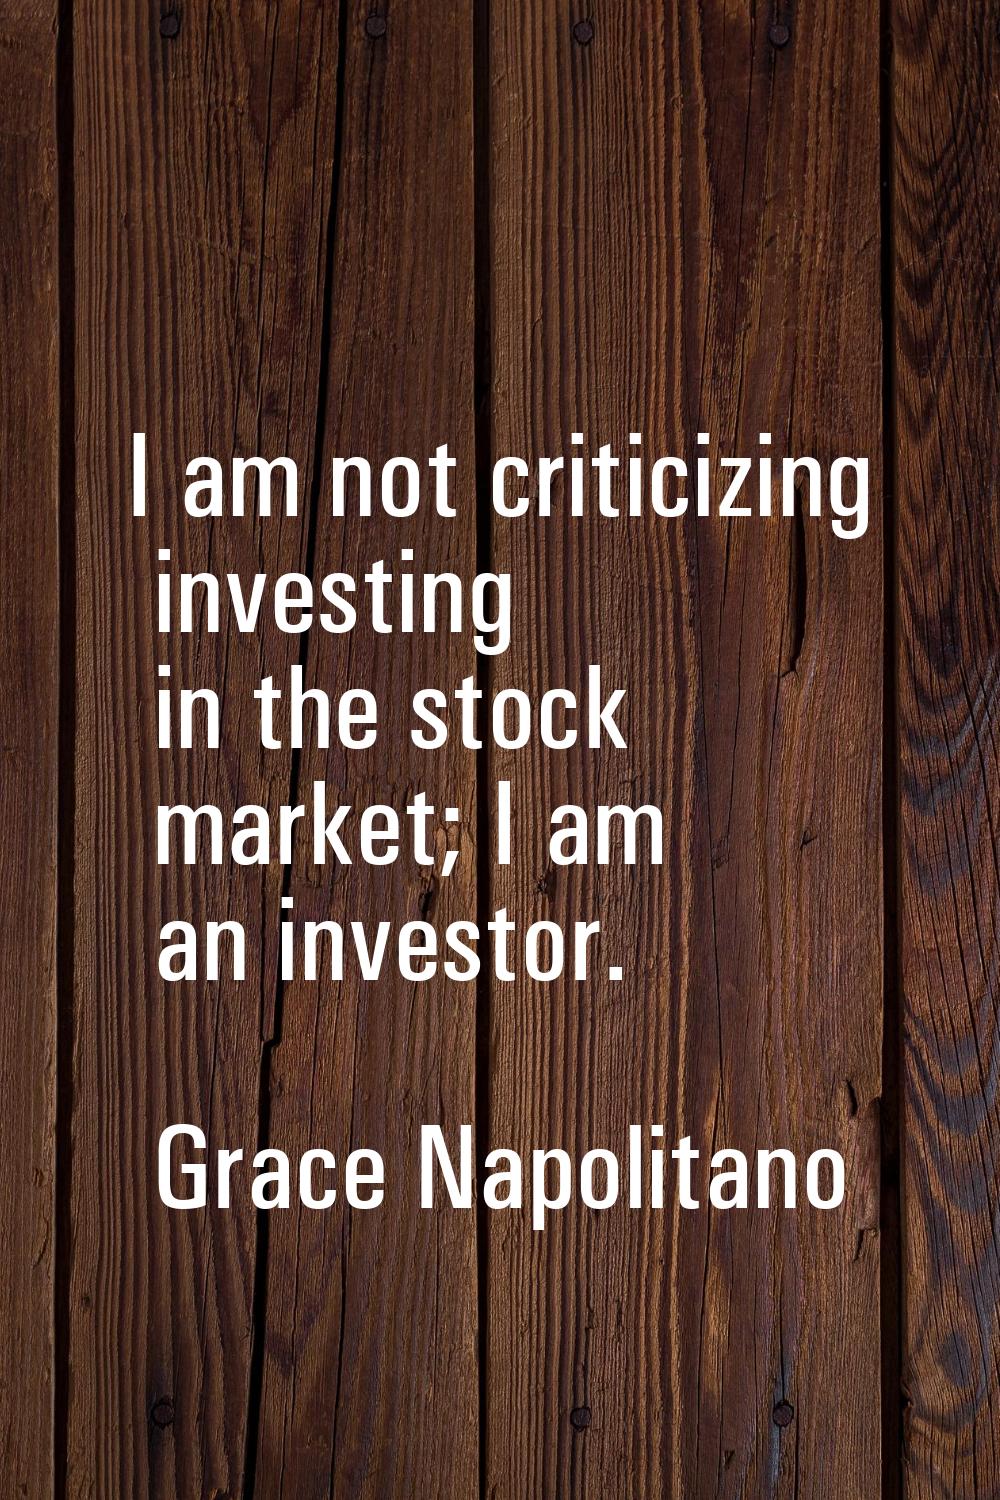 I am not criticizing investing in the stock market; I am an investor.